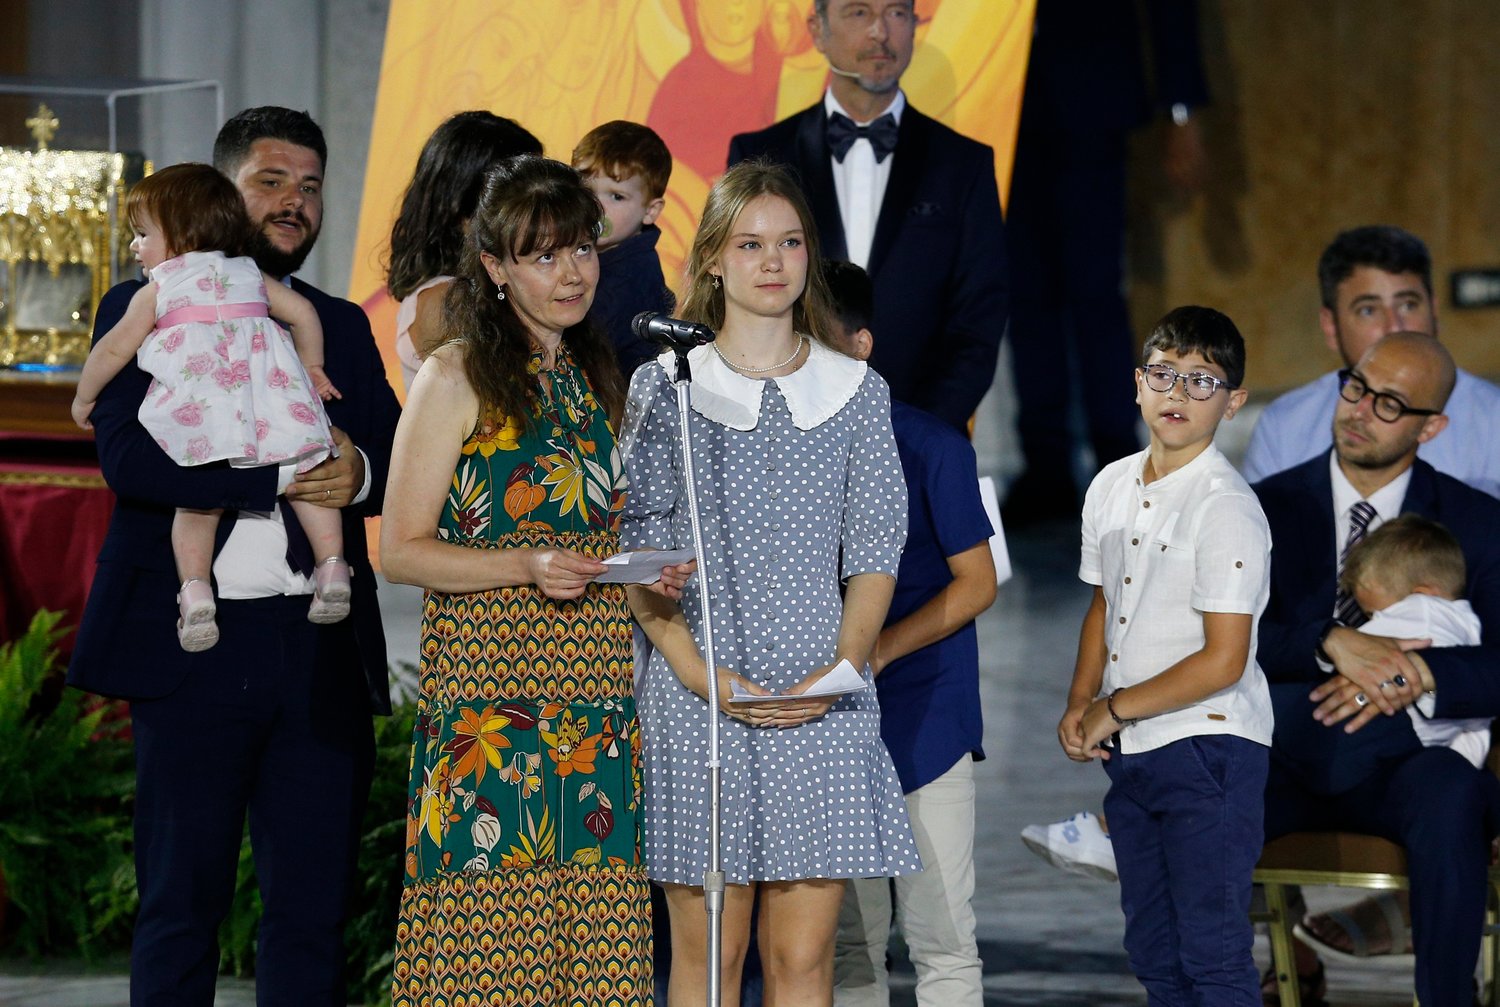 Iryna Kozhushko and her daughter, Sofia, from Ukraine, give their testimony as Pope Francis opens the World Meeting of Families in the Paul VI hall at the Vatican June 22. Pictured with them are Pietro and Erika Chiriaco, an Italian couple with six young children who are hosting them. The Festival of Families, an evening of sharing and music, was the opening event of the five-day meeting.